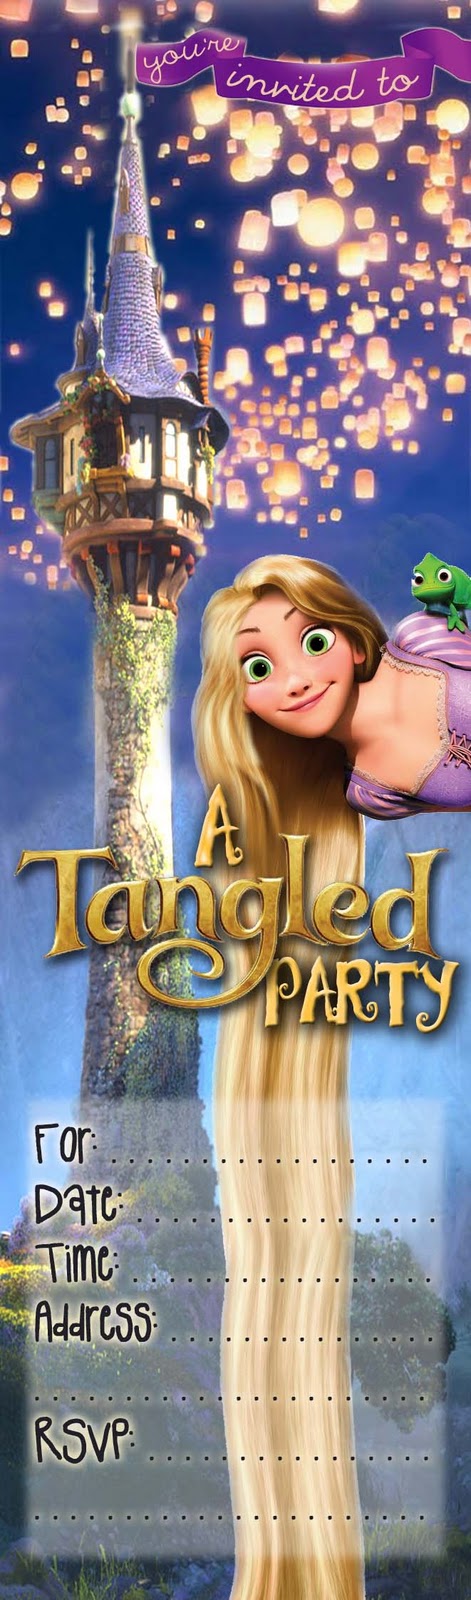 Free Printable Tangled Party Invitations